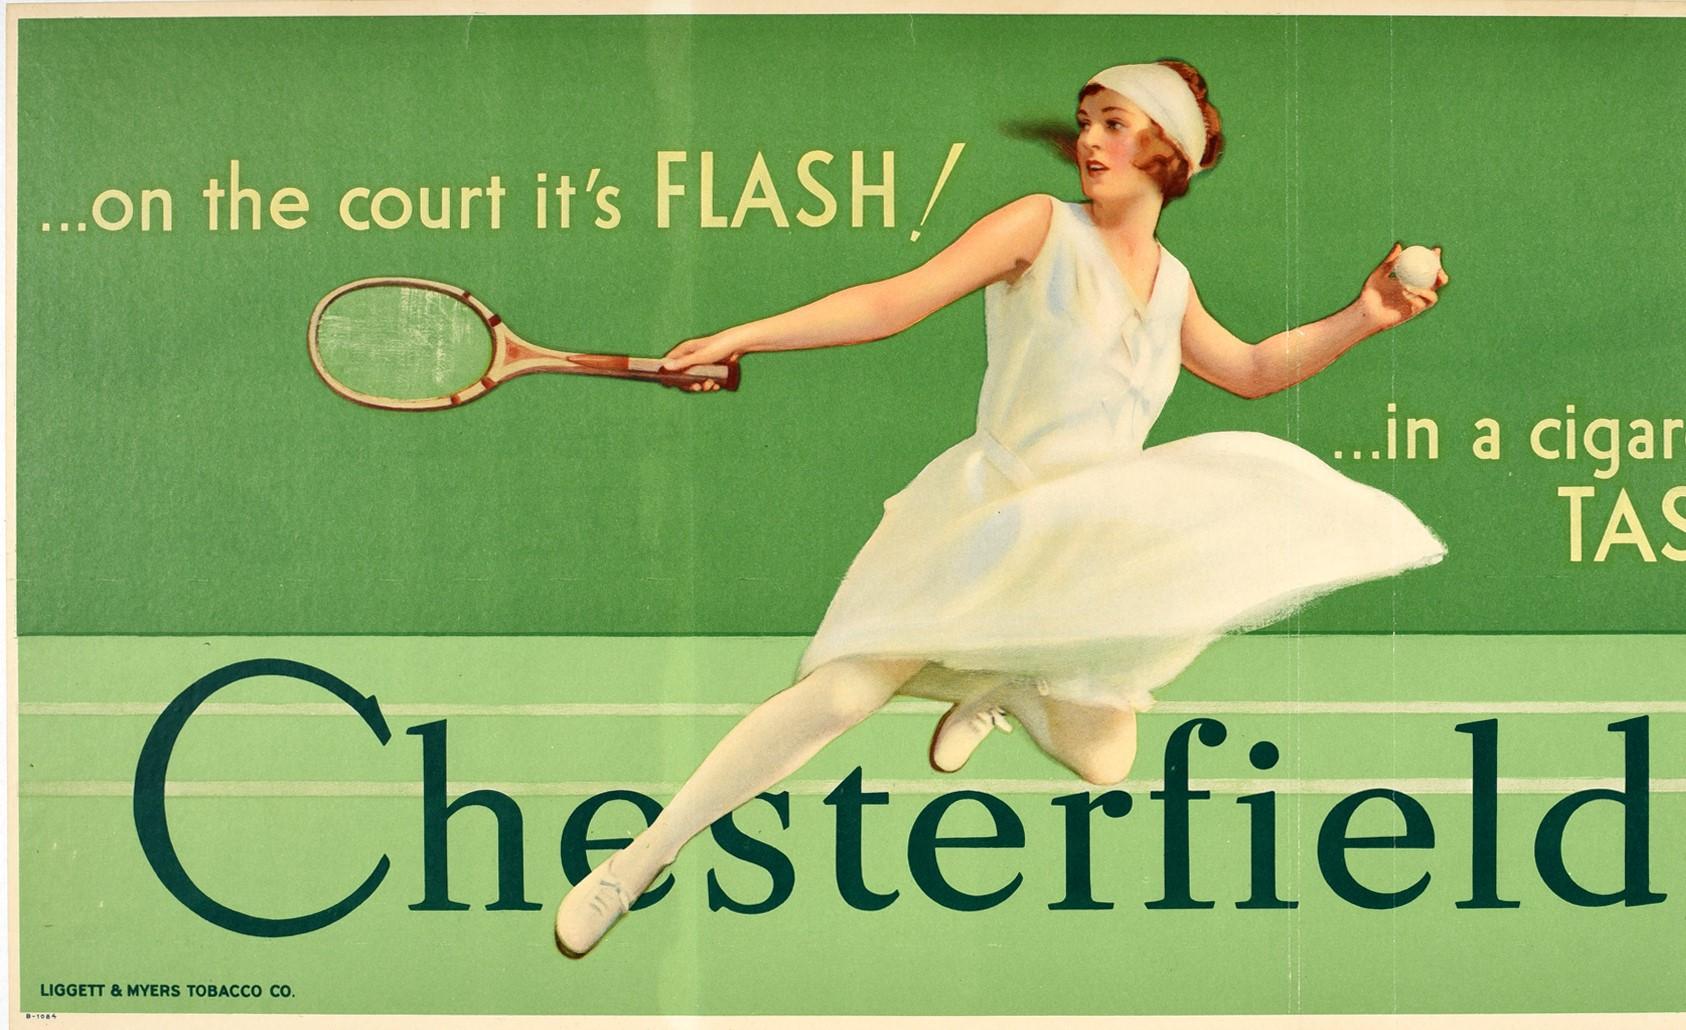 Original vintage advertising poster for Chesterfield cigarettes, on the court it's Flash! in a cigarette it's Taste! - featuring a great illustration by Charles E. Chambers (1883-1941) of a lady wearing tennis whites and swinging a tennis racket in